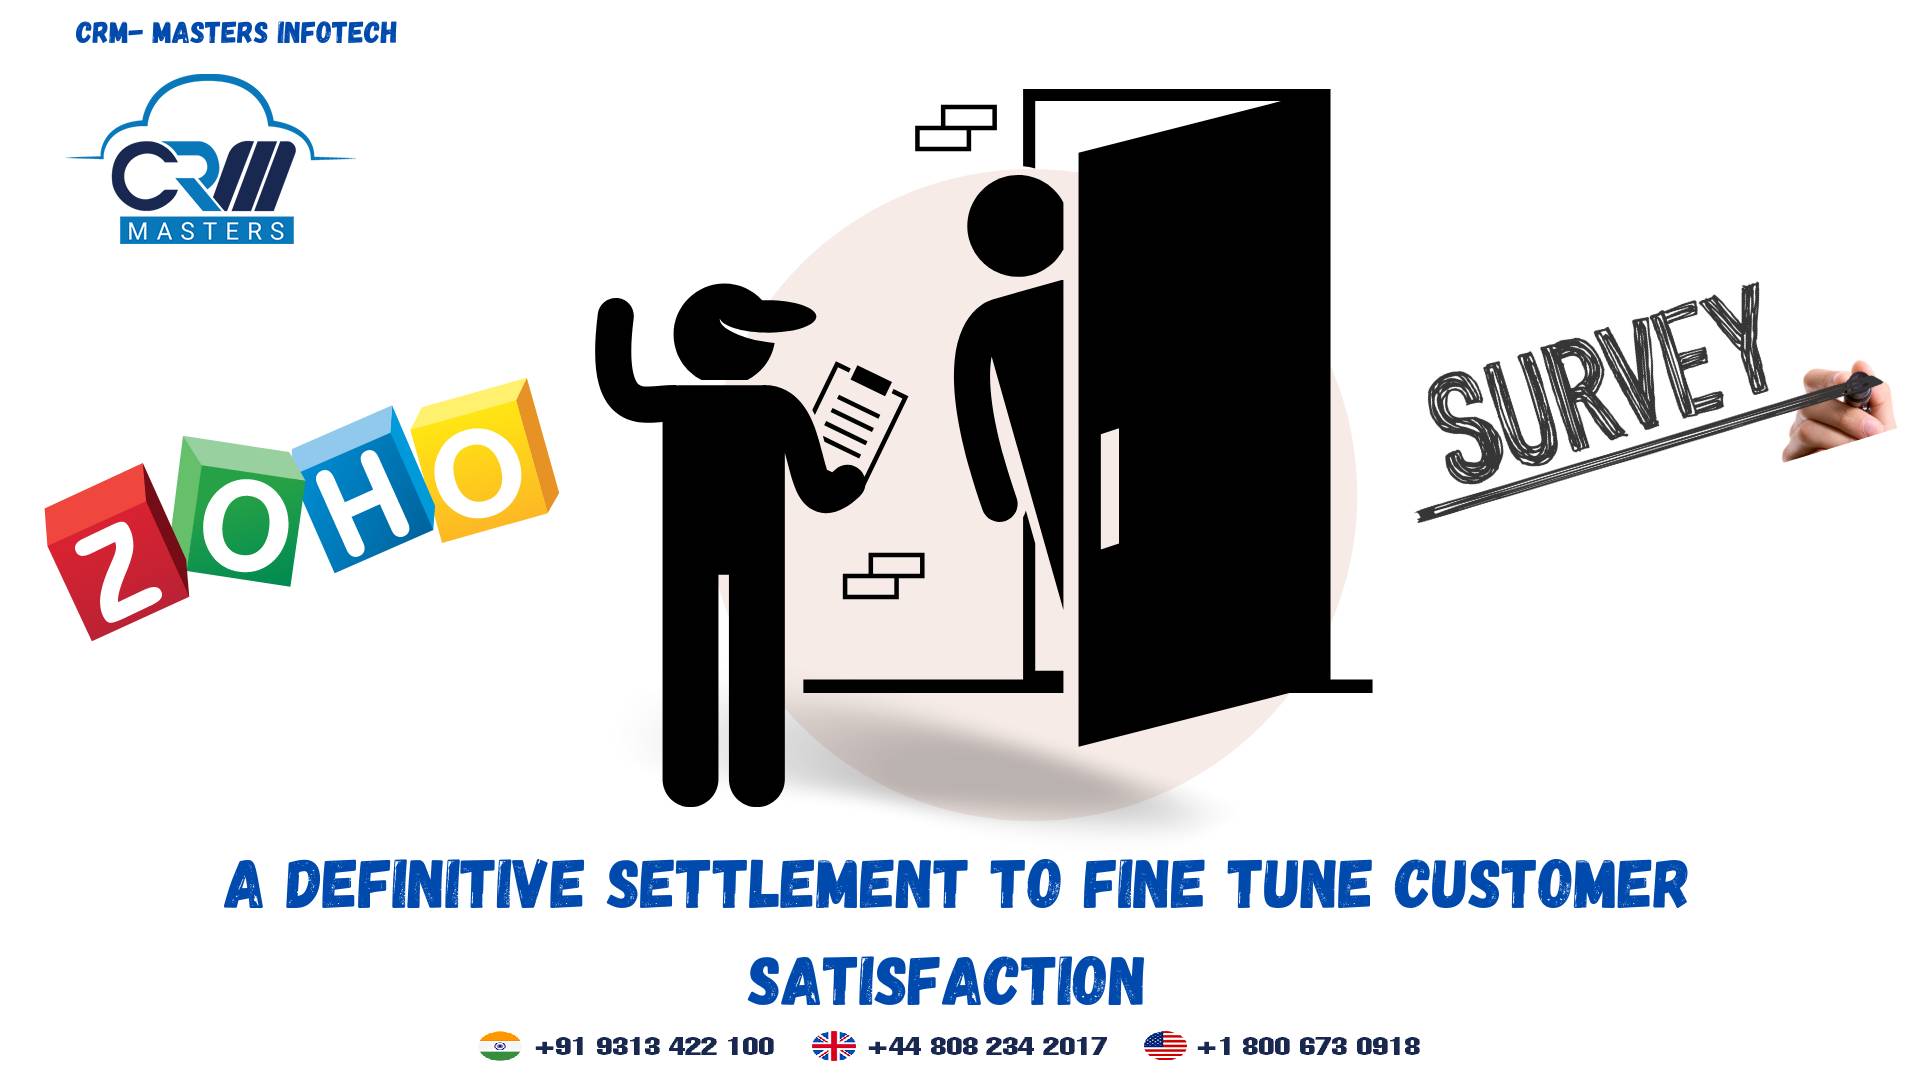 Zoho Survey – A Definitive Settlement to Fine Tune Customer Satisfaction